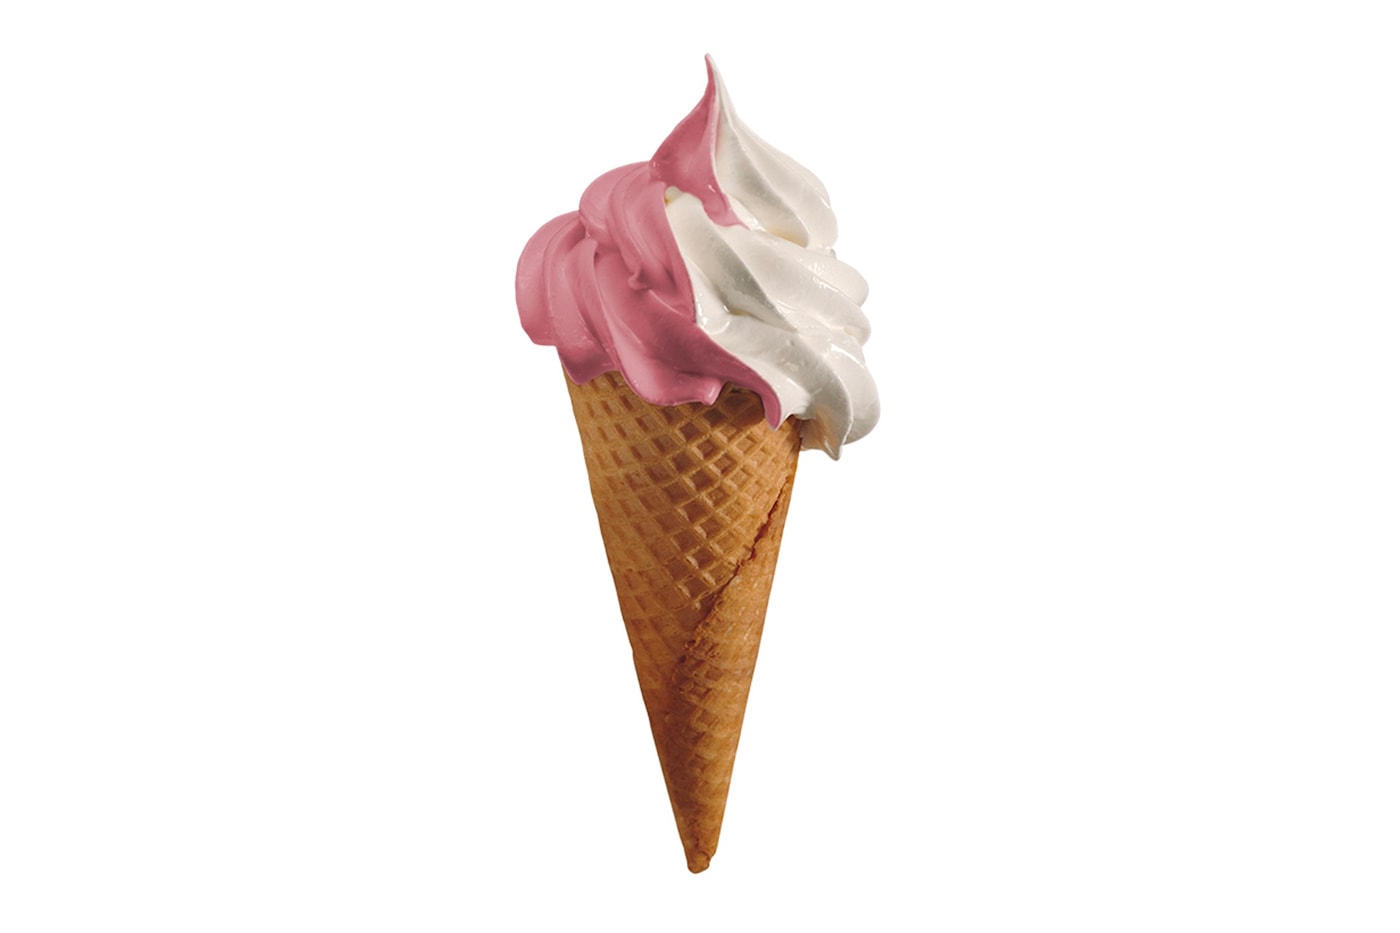 IKEA Lychee and Rose Raspberry Flavored Ice Cream Swedish Crayfish Party Meal Return Launch Info Swedish Gourmet Station